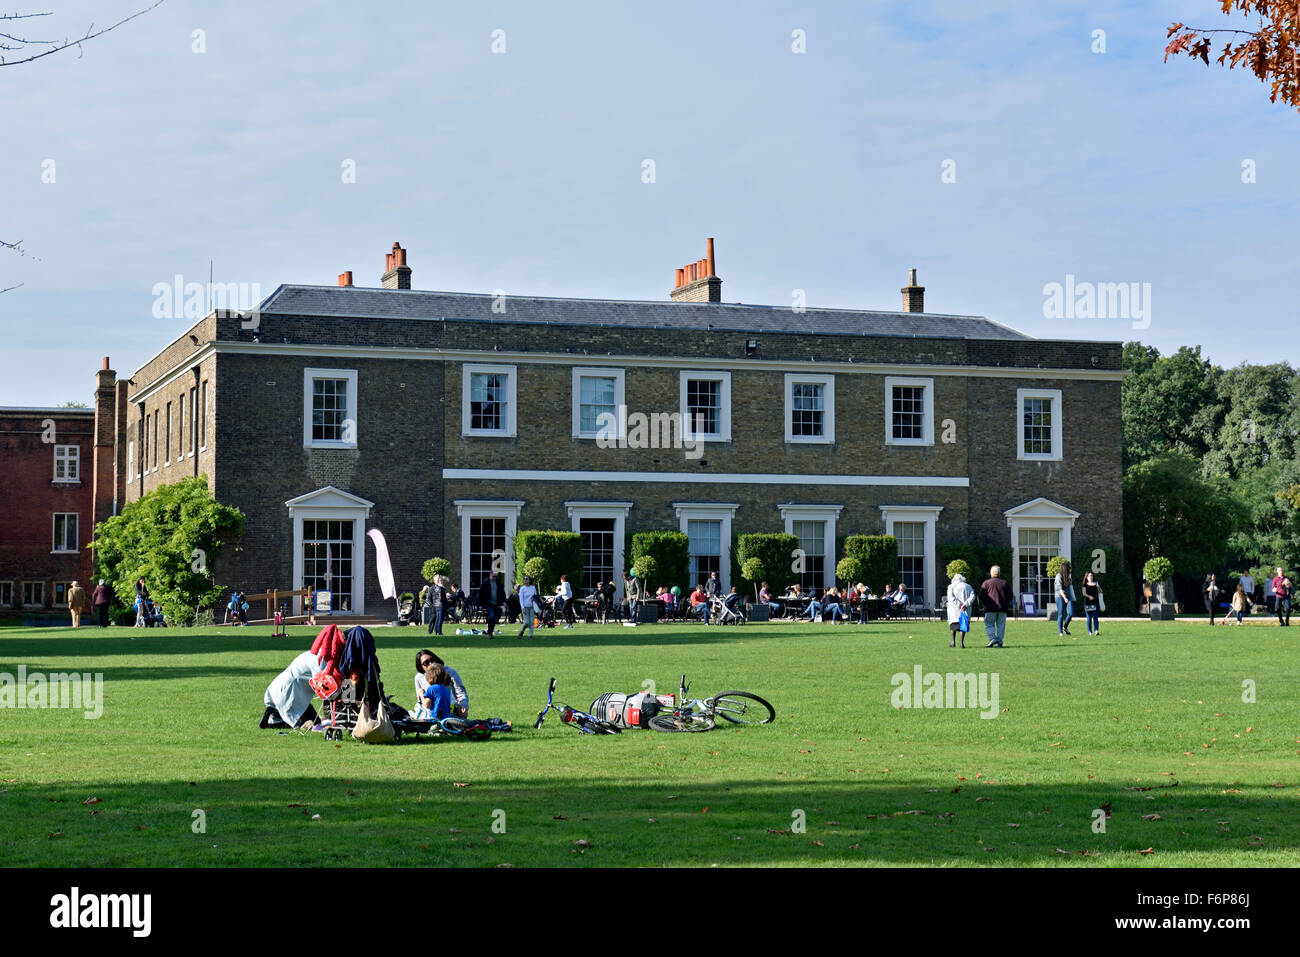 Lawn and people in front of Fulham Palace London Borough of Hammersmith and Fulham England Britain UK Stock Photo